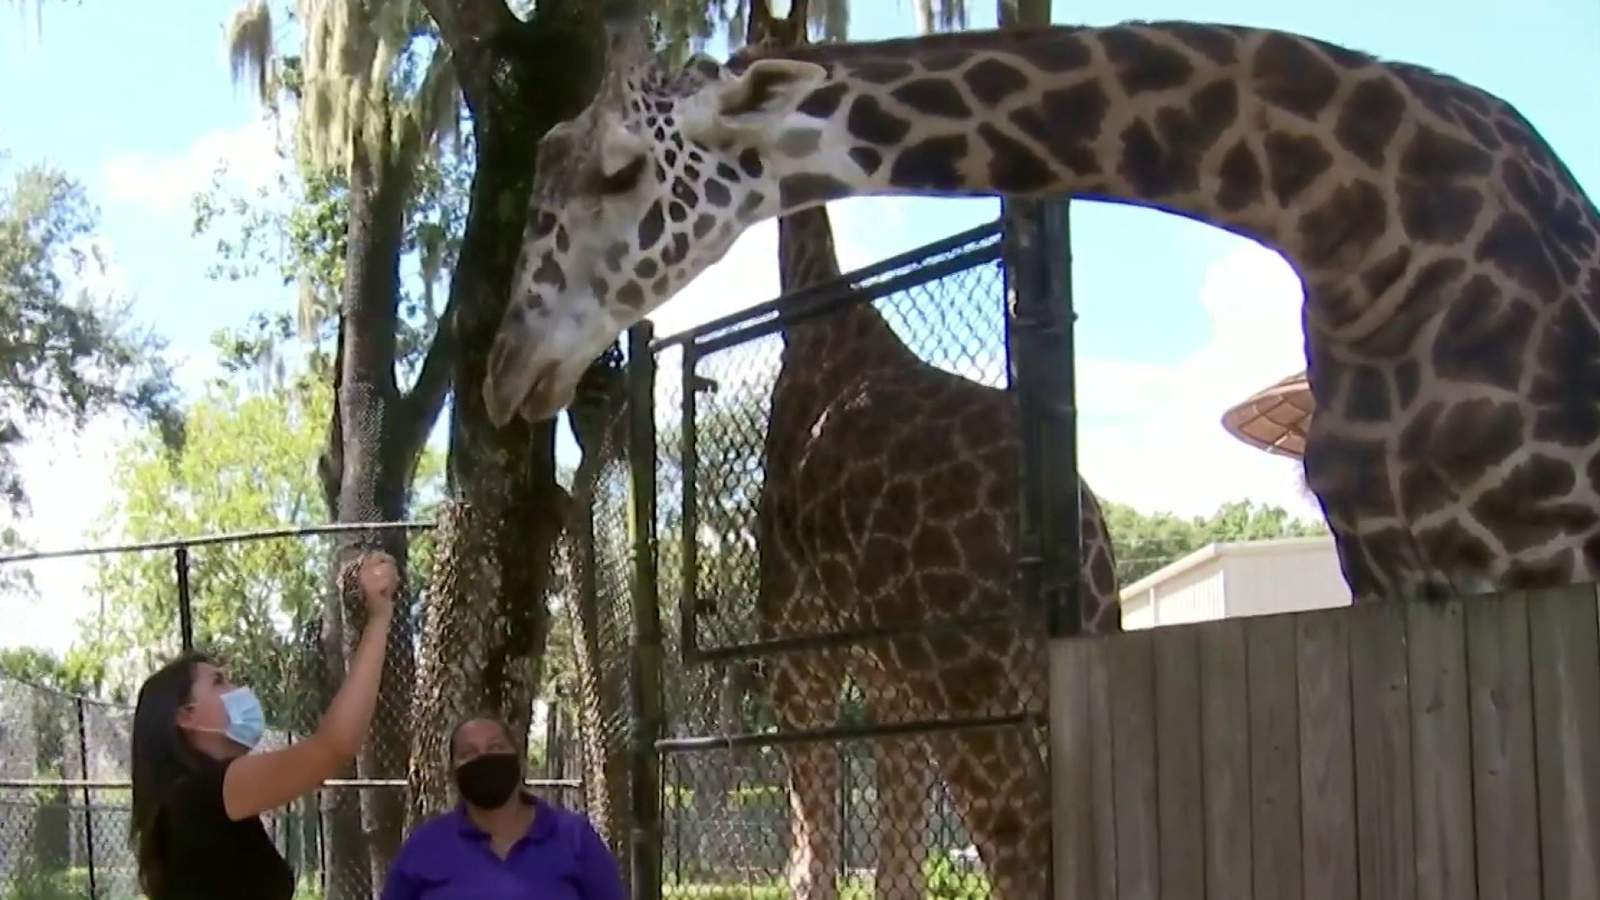 Getting spooky: Central Florida Zoo hosts Boo Bash